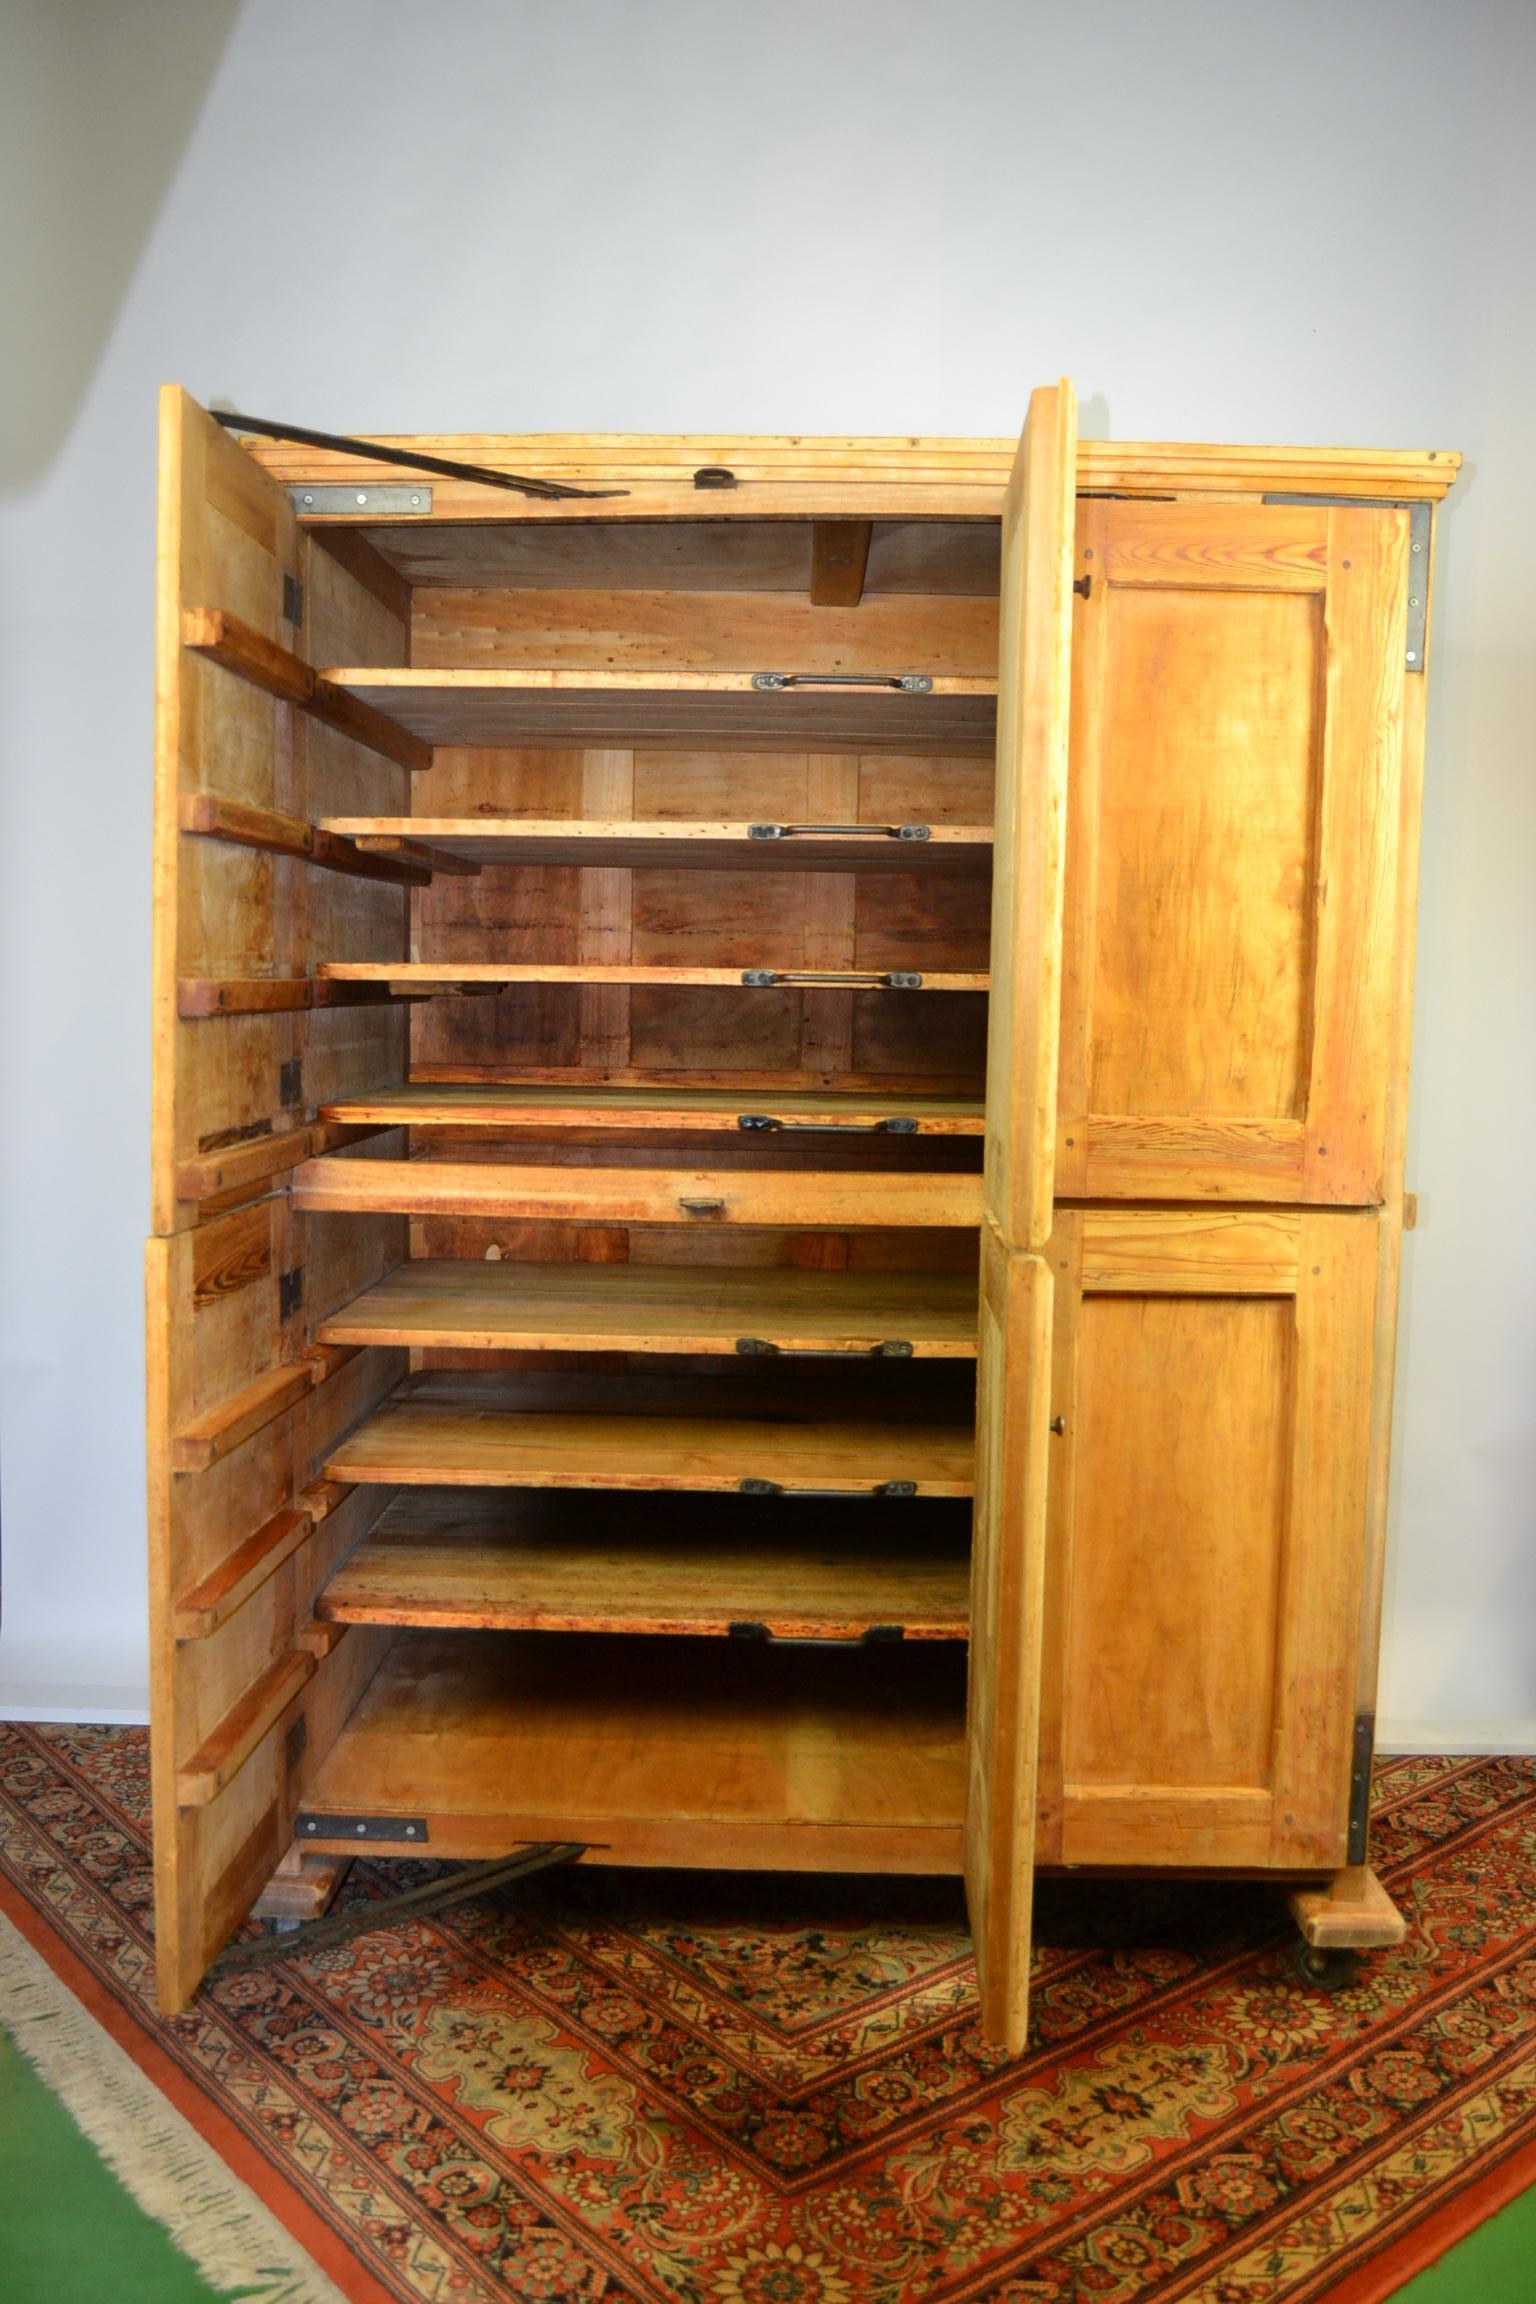 Awesome wooden vintage Bakery Cabinet on wheels.
This Baker's Cabinet was made by  Ets. Walravens - Dekoninck Brussels Belgium circa 1940. 
Original Company Sign is still on.
This type of Baker's cabinet was used to let the dough yeast and rest to